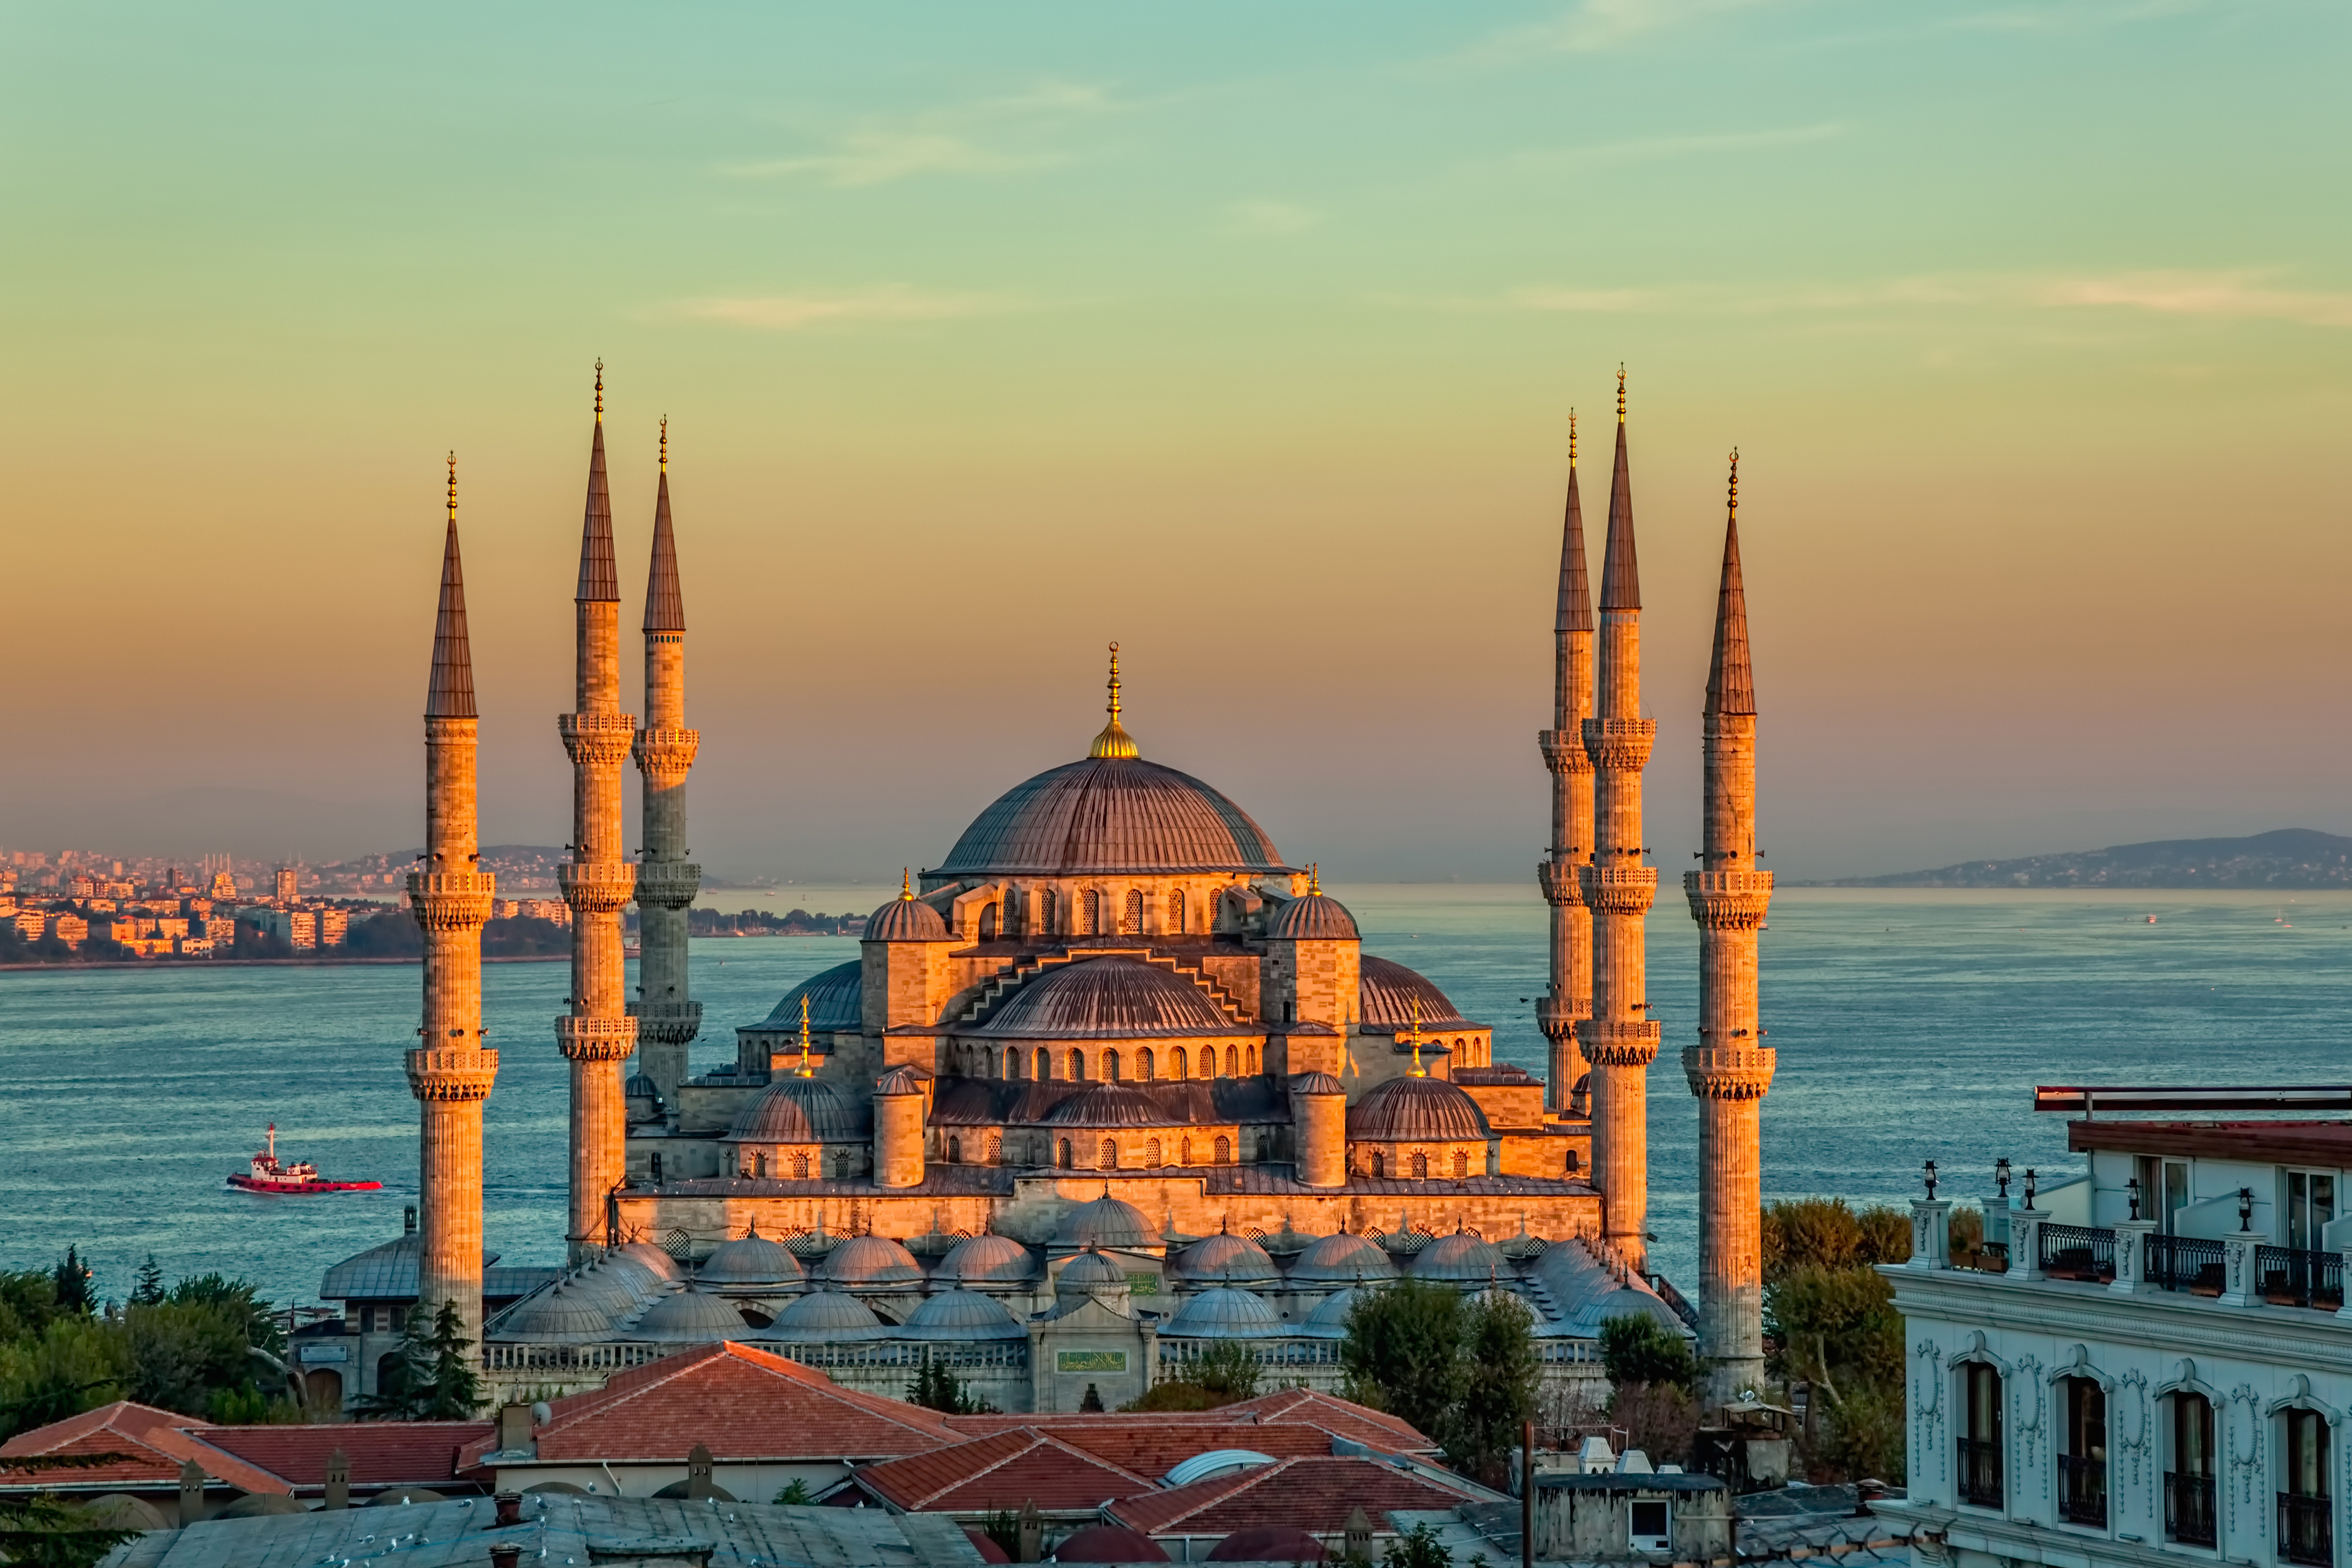 sultan ahmed mosque, mosque, turkey, dome, religious, architecture, building, istanbul, mosques